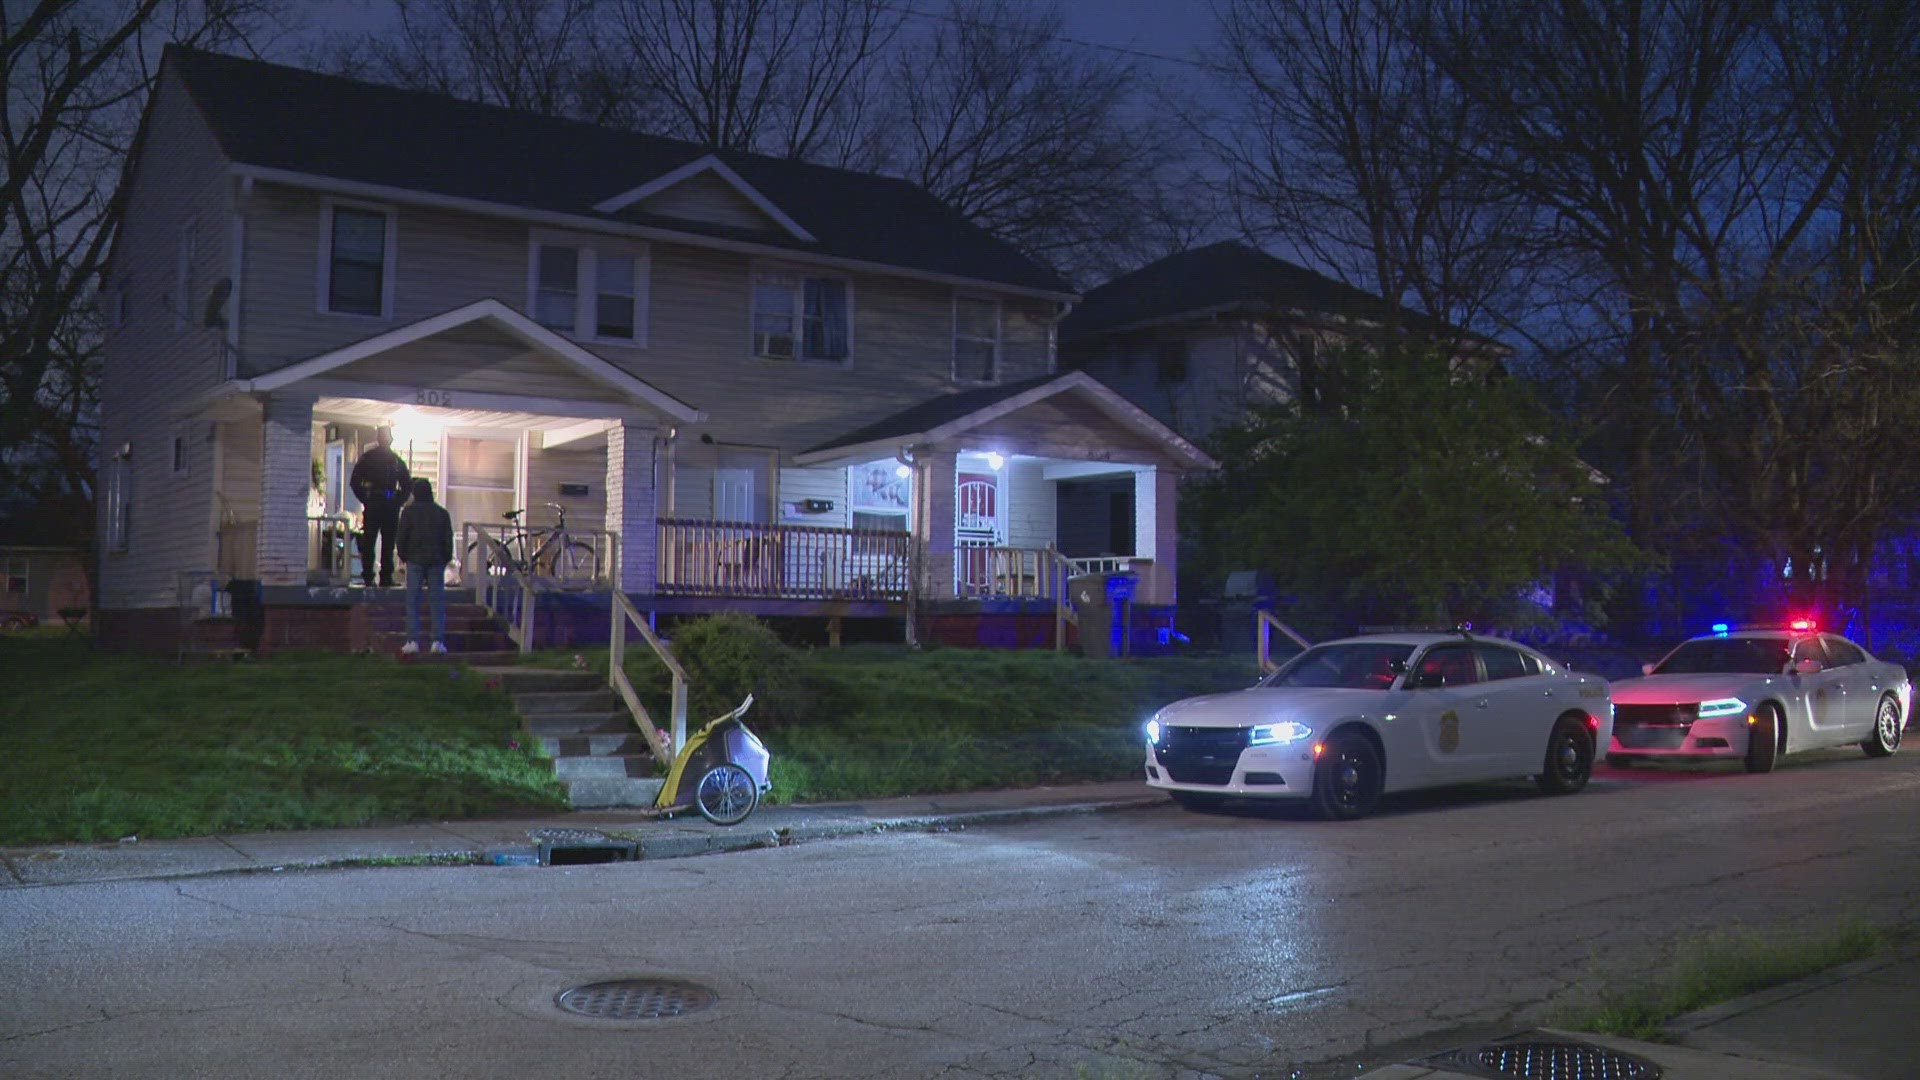 The shooting was reported around 6:30 a.m. Wednesday near East 10th and North Rural streets.